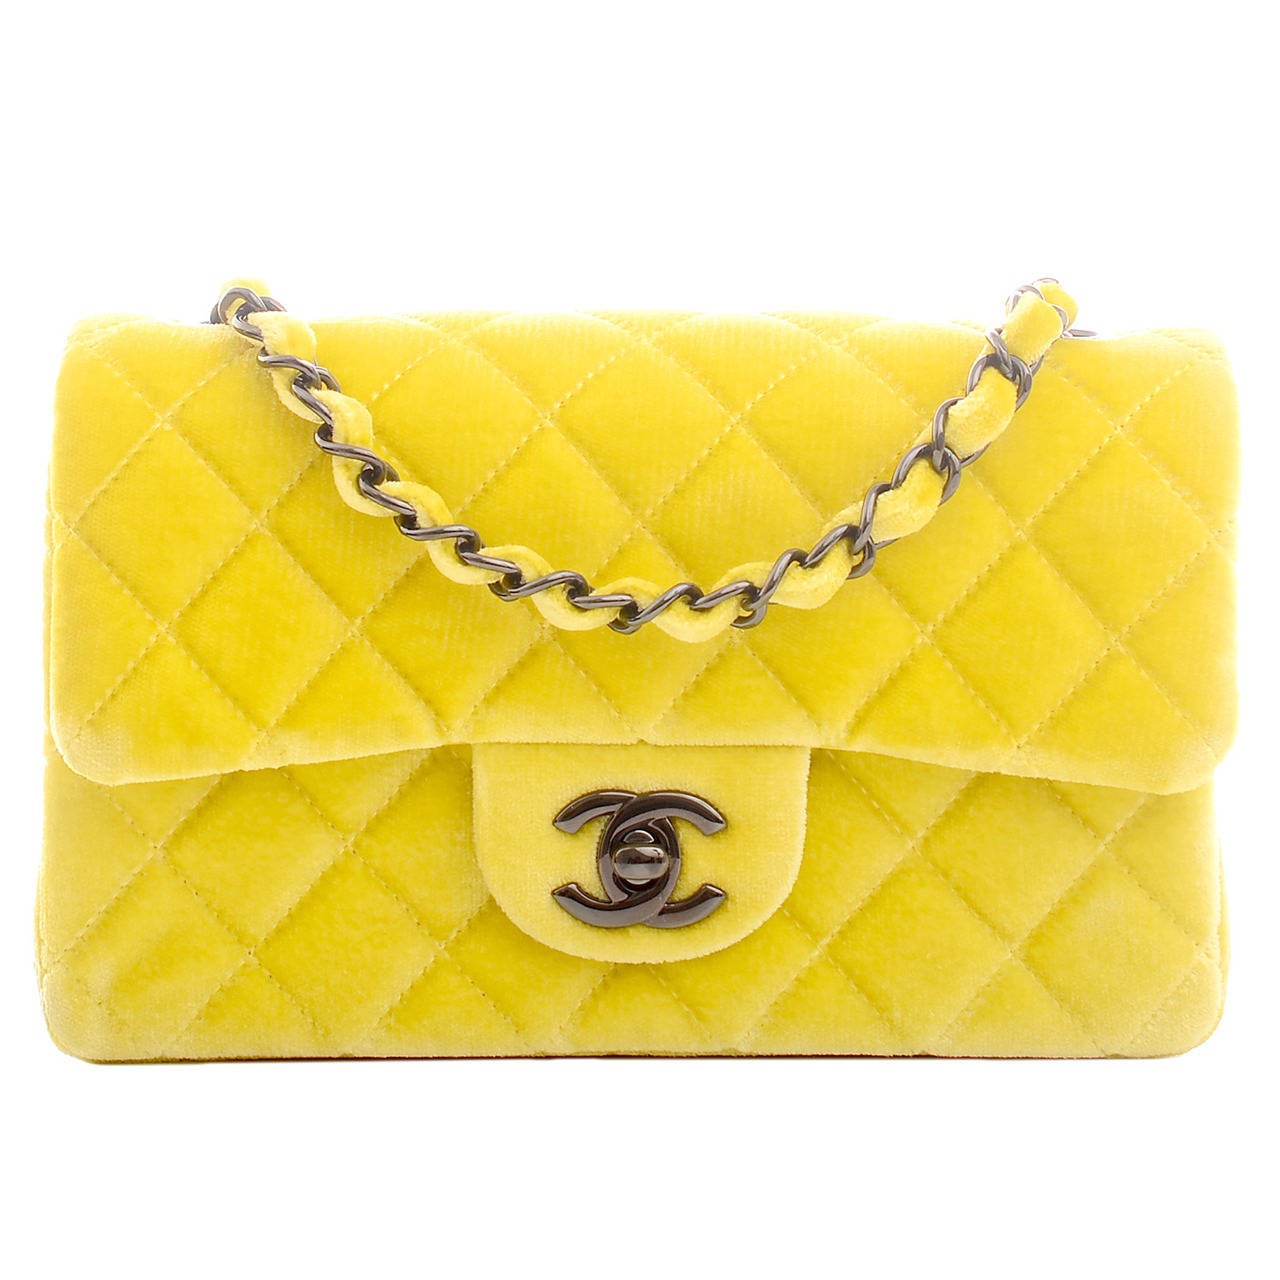 Chanel Yellow Quilted Velvet Small Classic 2.55 Flap Bag